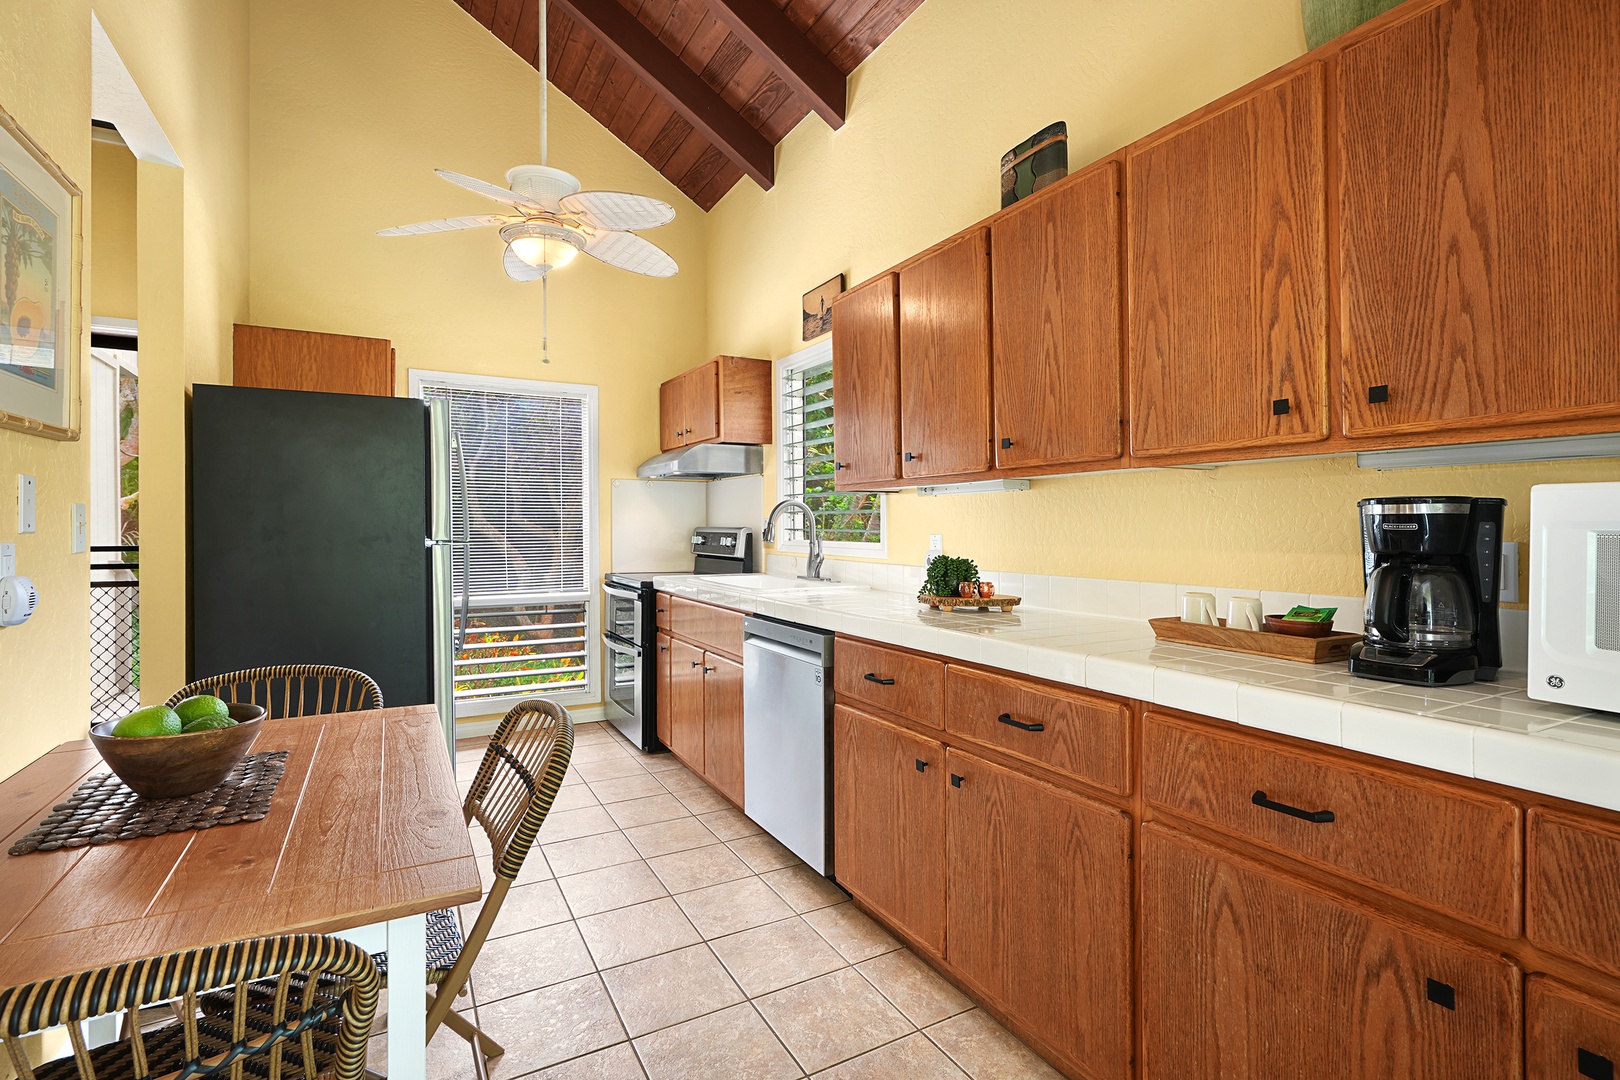 Koloa Vacation Rentals, Kauai Birdsong at Poipu Crater - The fully-stocked kitchen with wide counter spaces to make meal prepping a breeze.